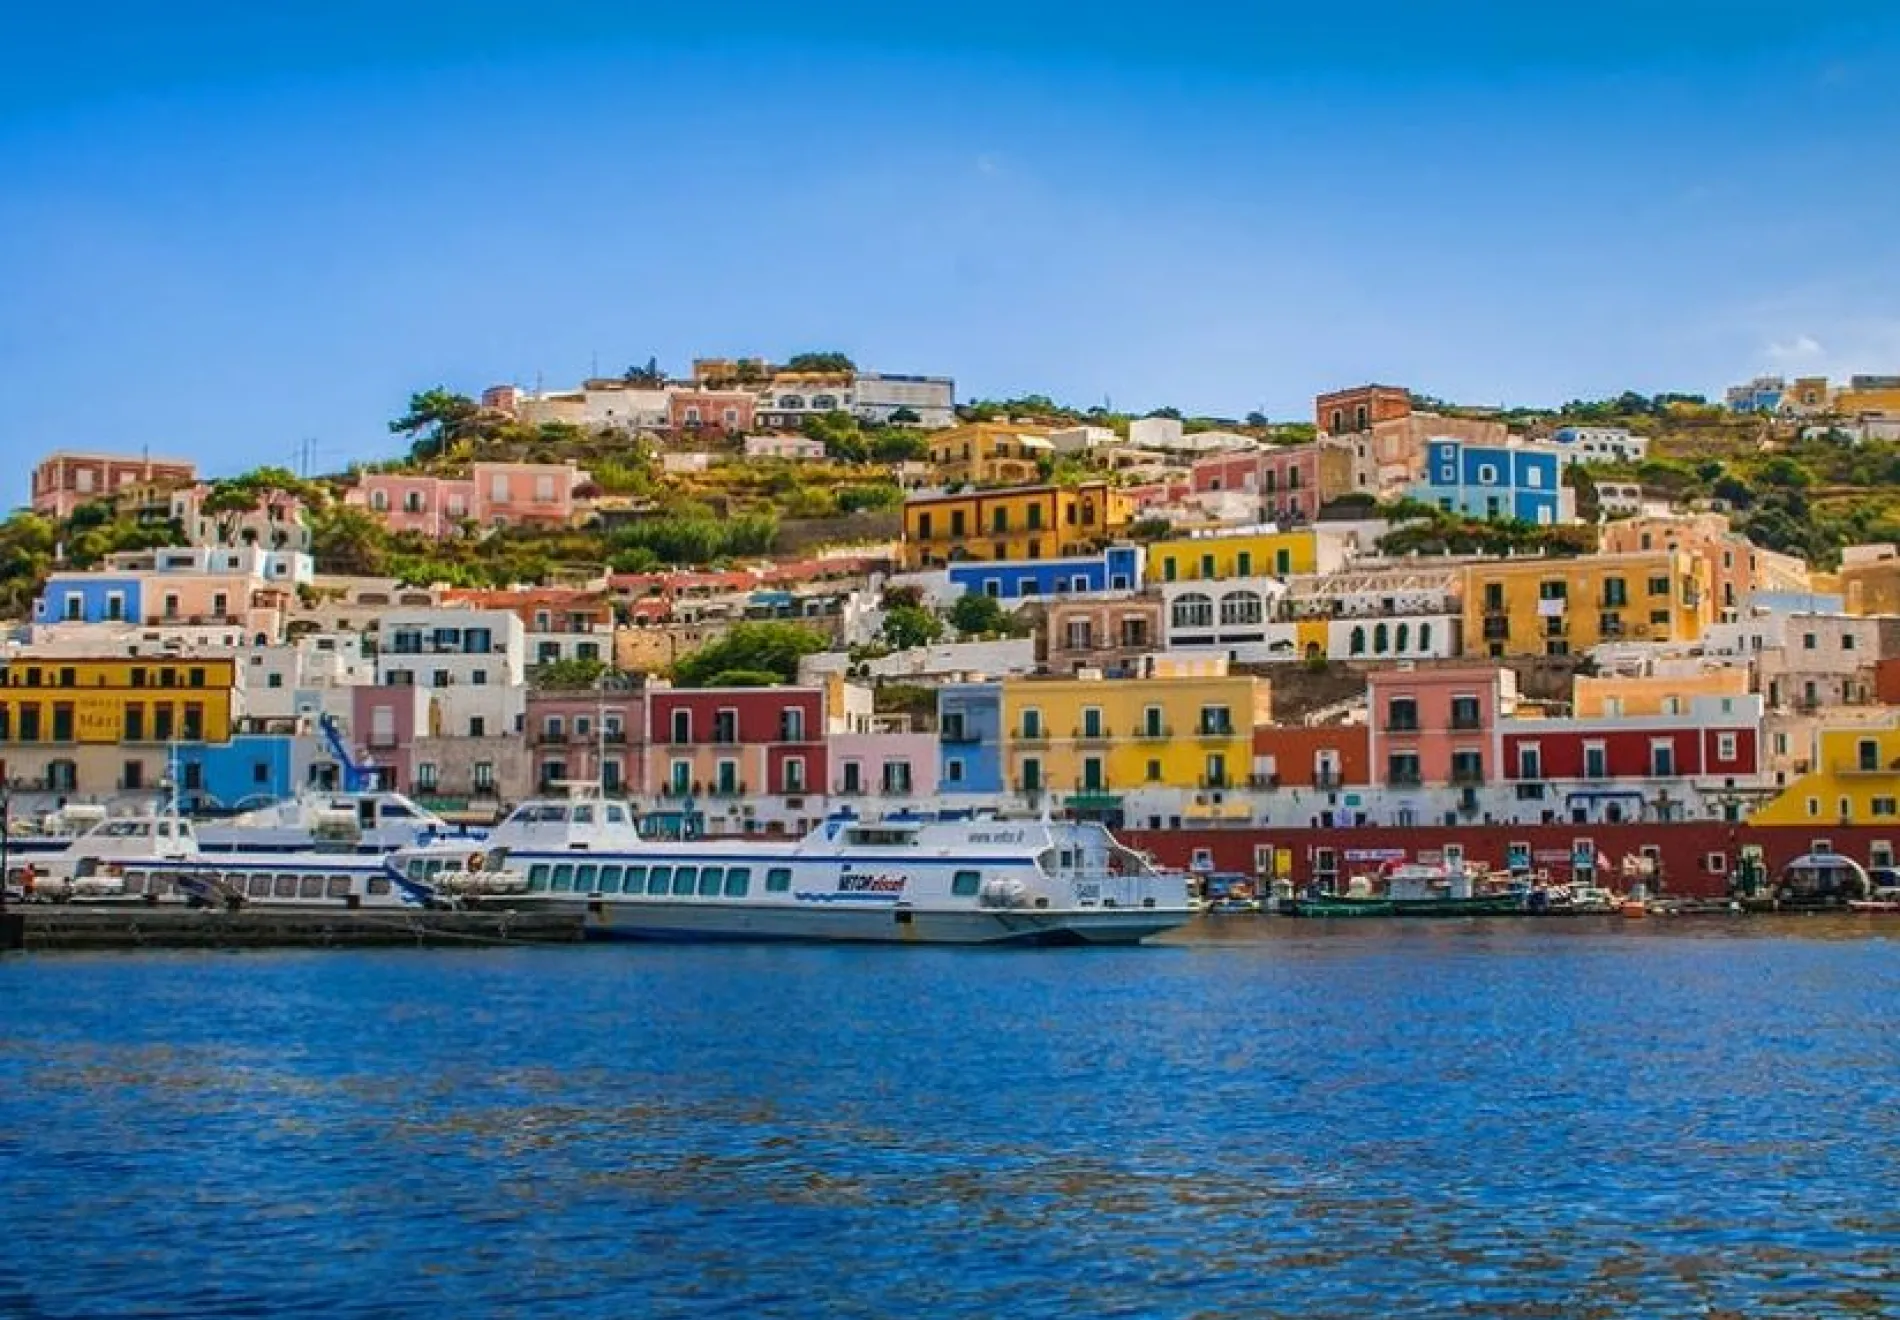 View-of-the-Main-Harbor-and-Port-at-Ponza-Italy.-Boats-at-sea-and-houses-on-the-mountainous-coastline CROP